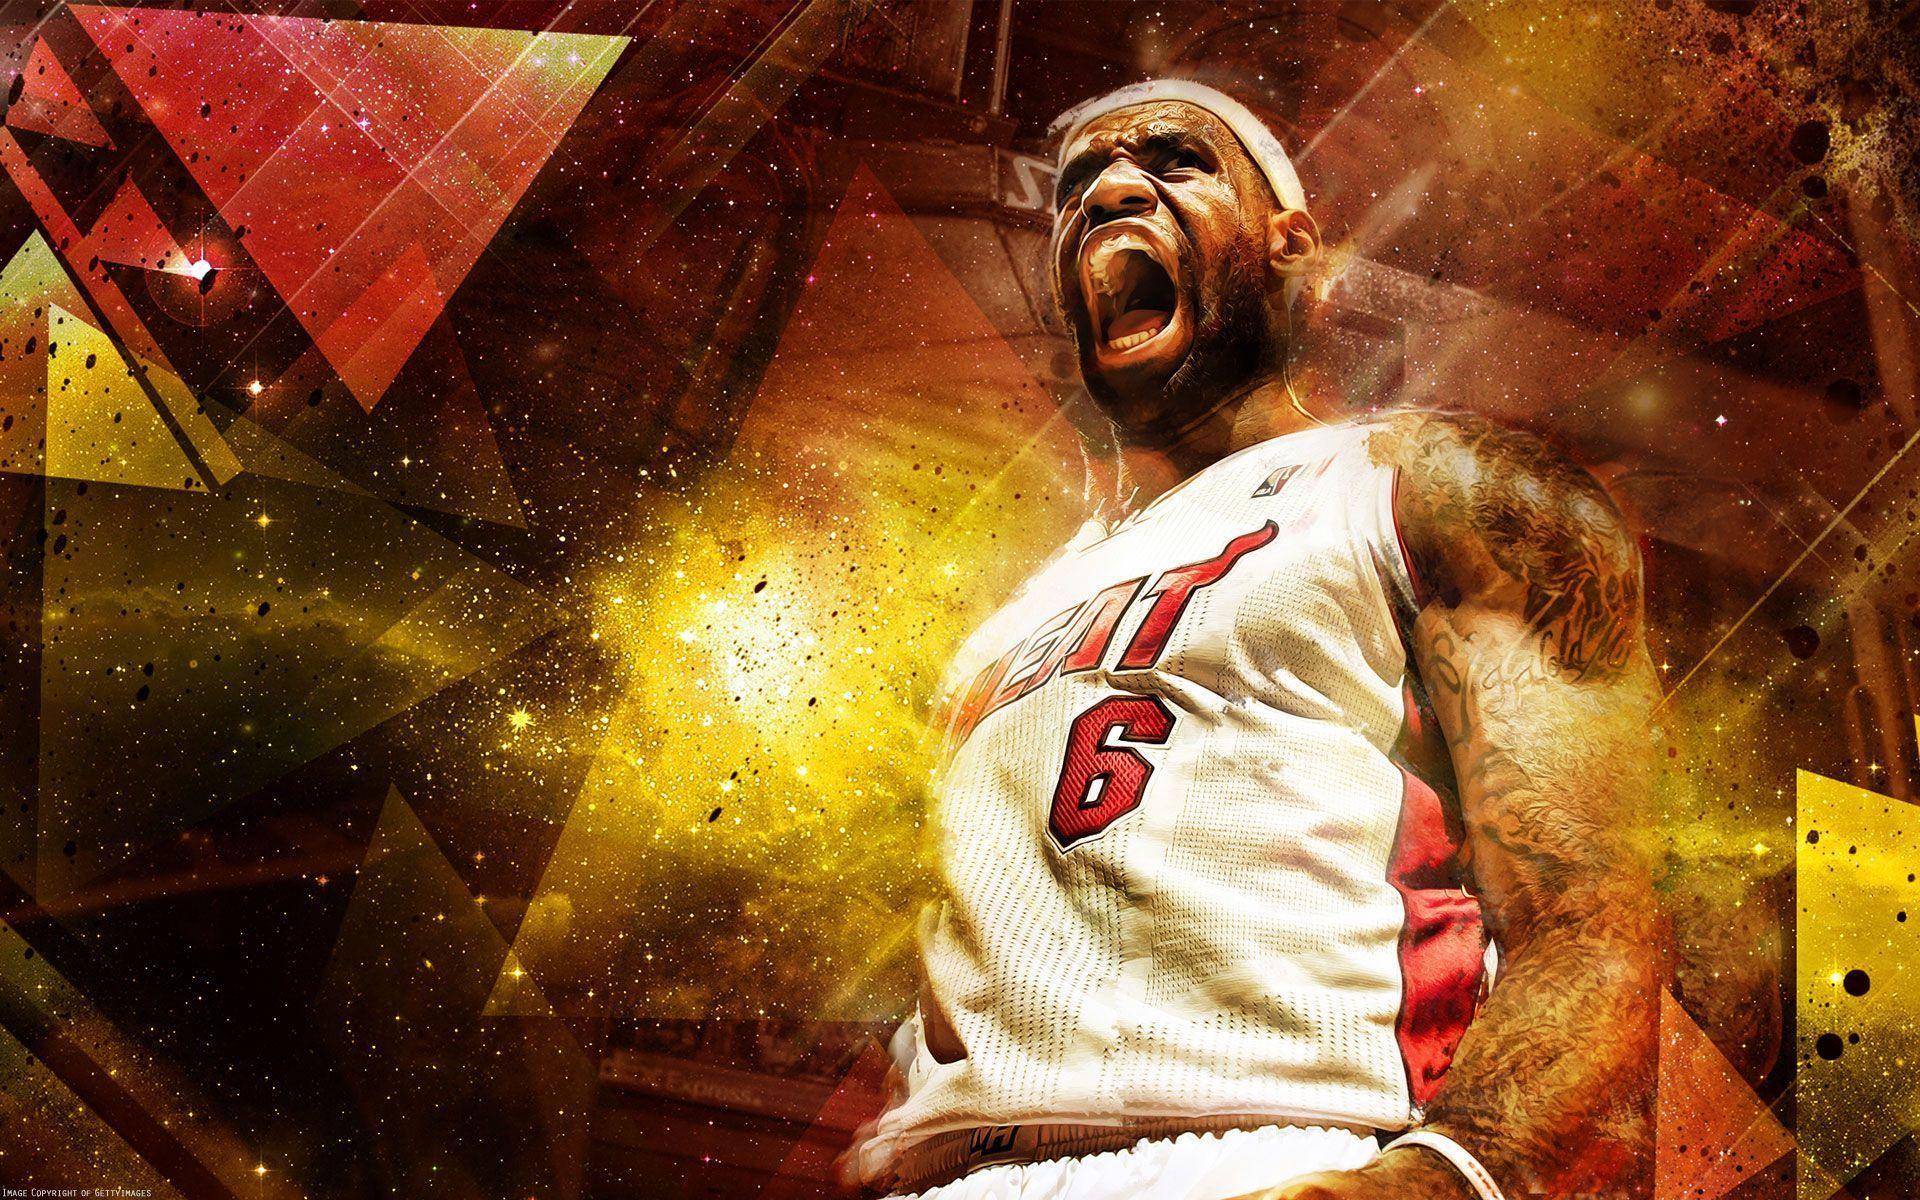 LeBron James desktop wallppaers for your Tablet or PC, Mac